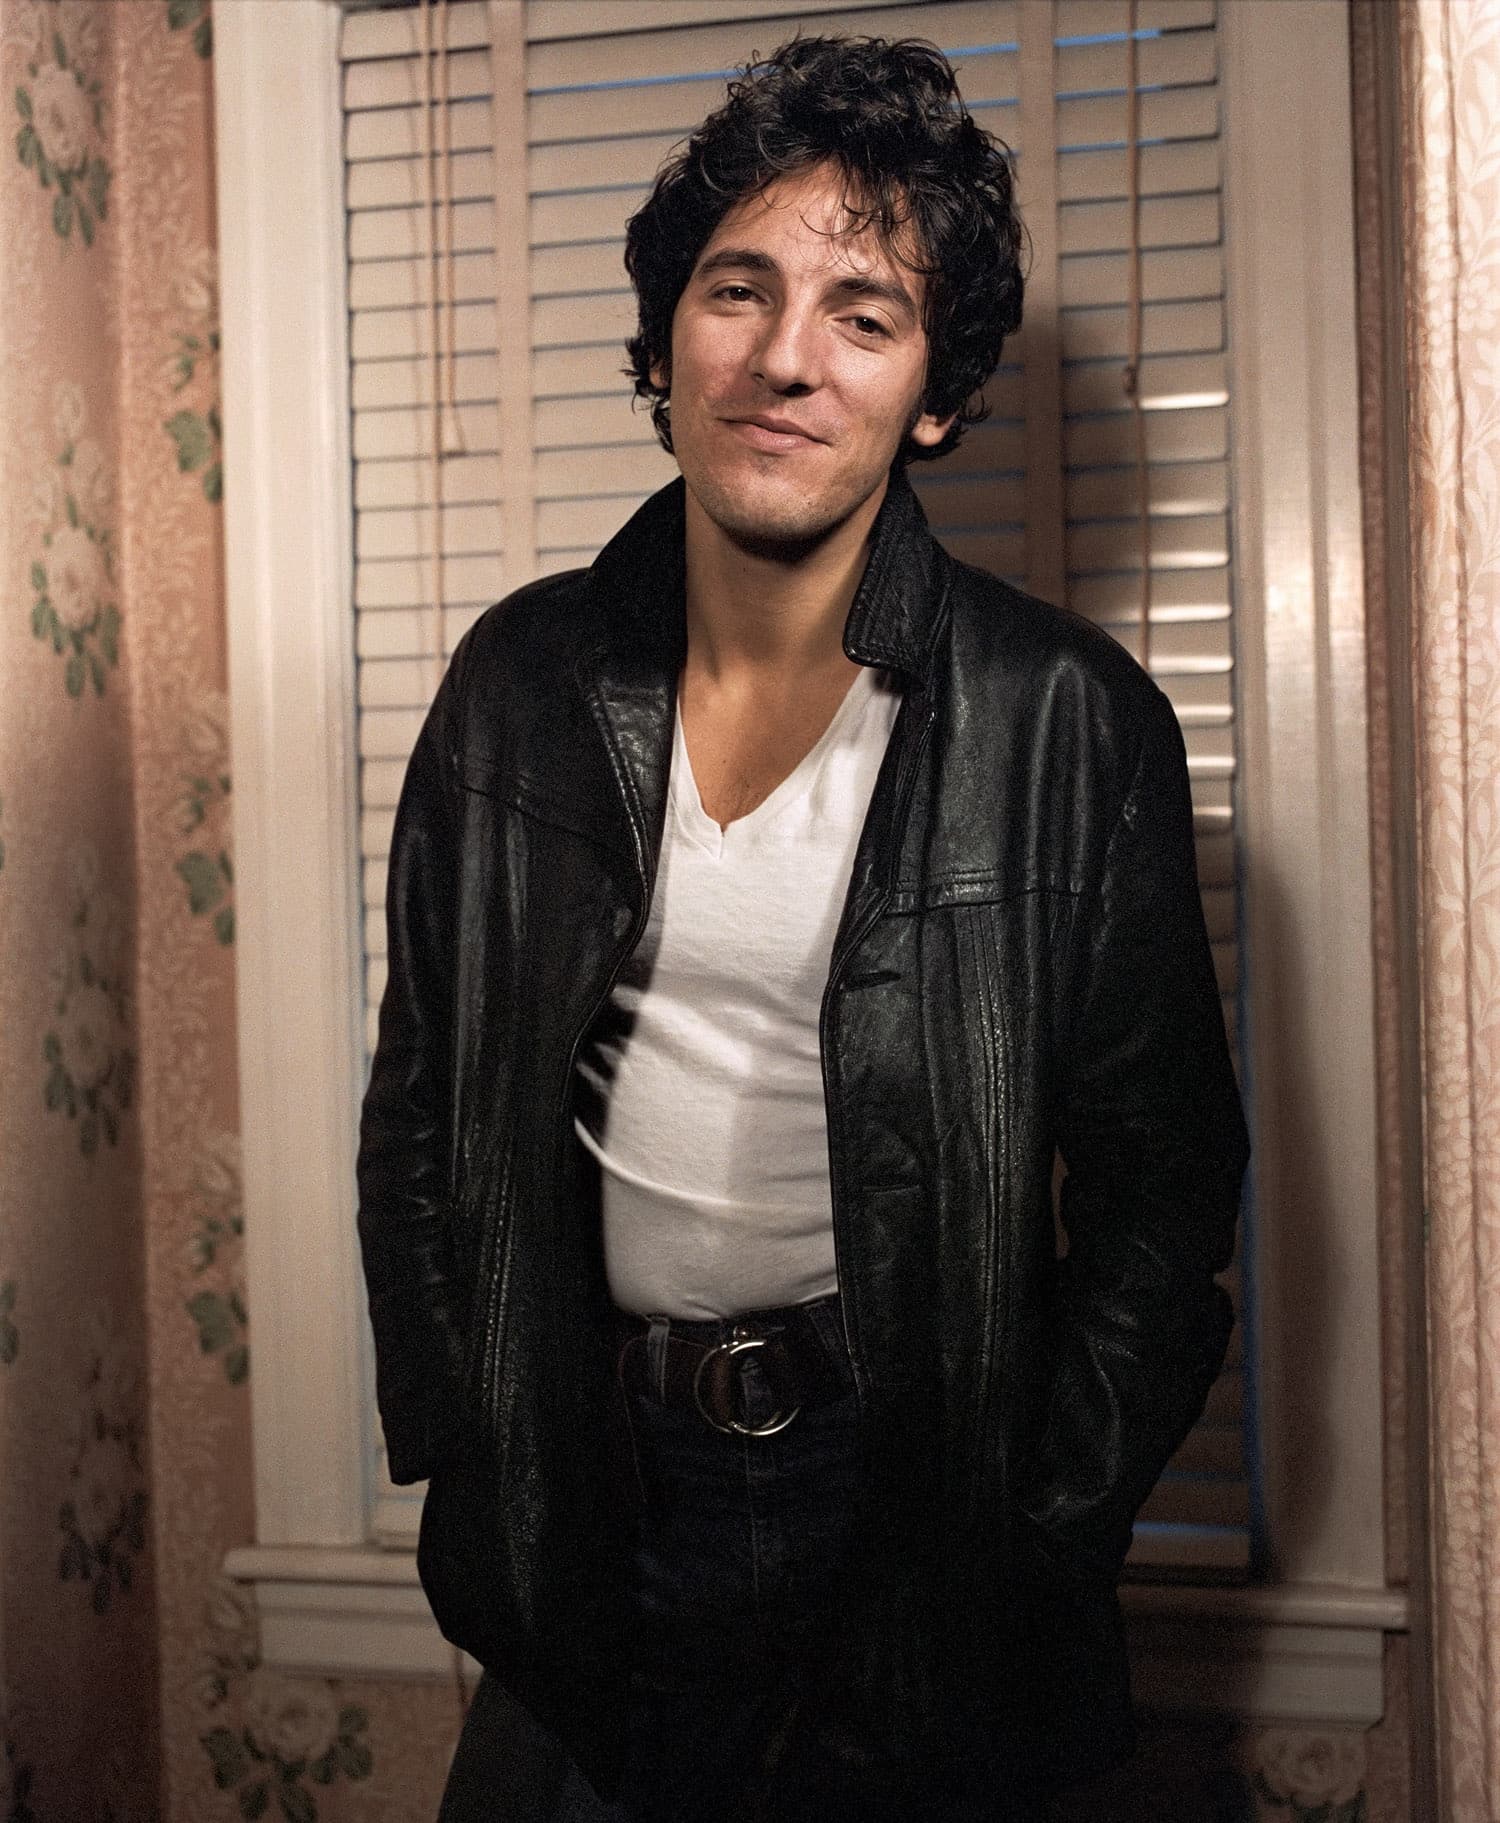 Bruce Springsteen Darkness on the Edge of Town photo by Frank Stefanko